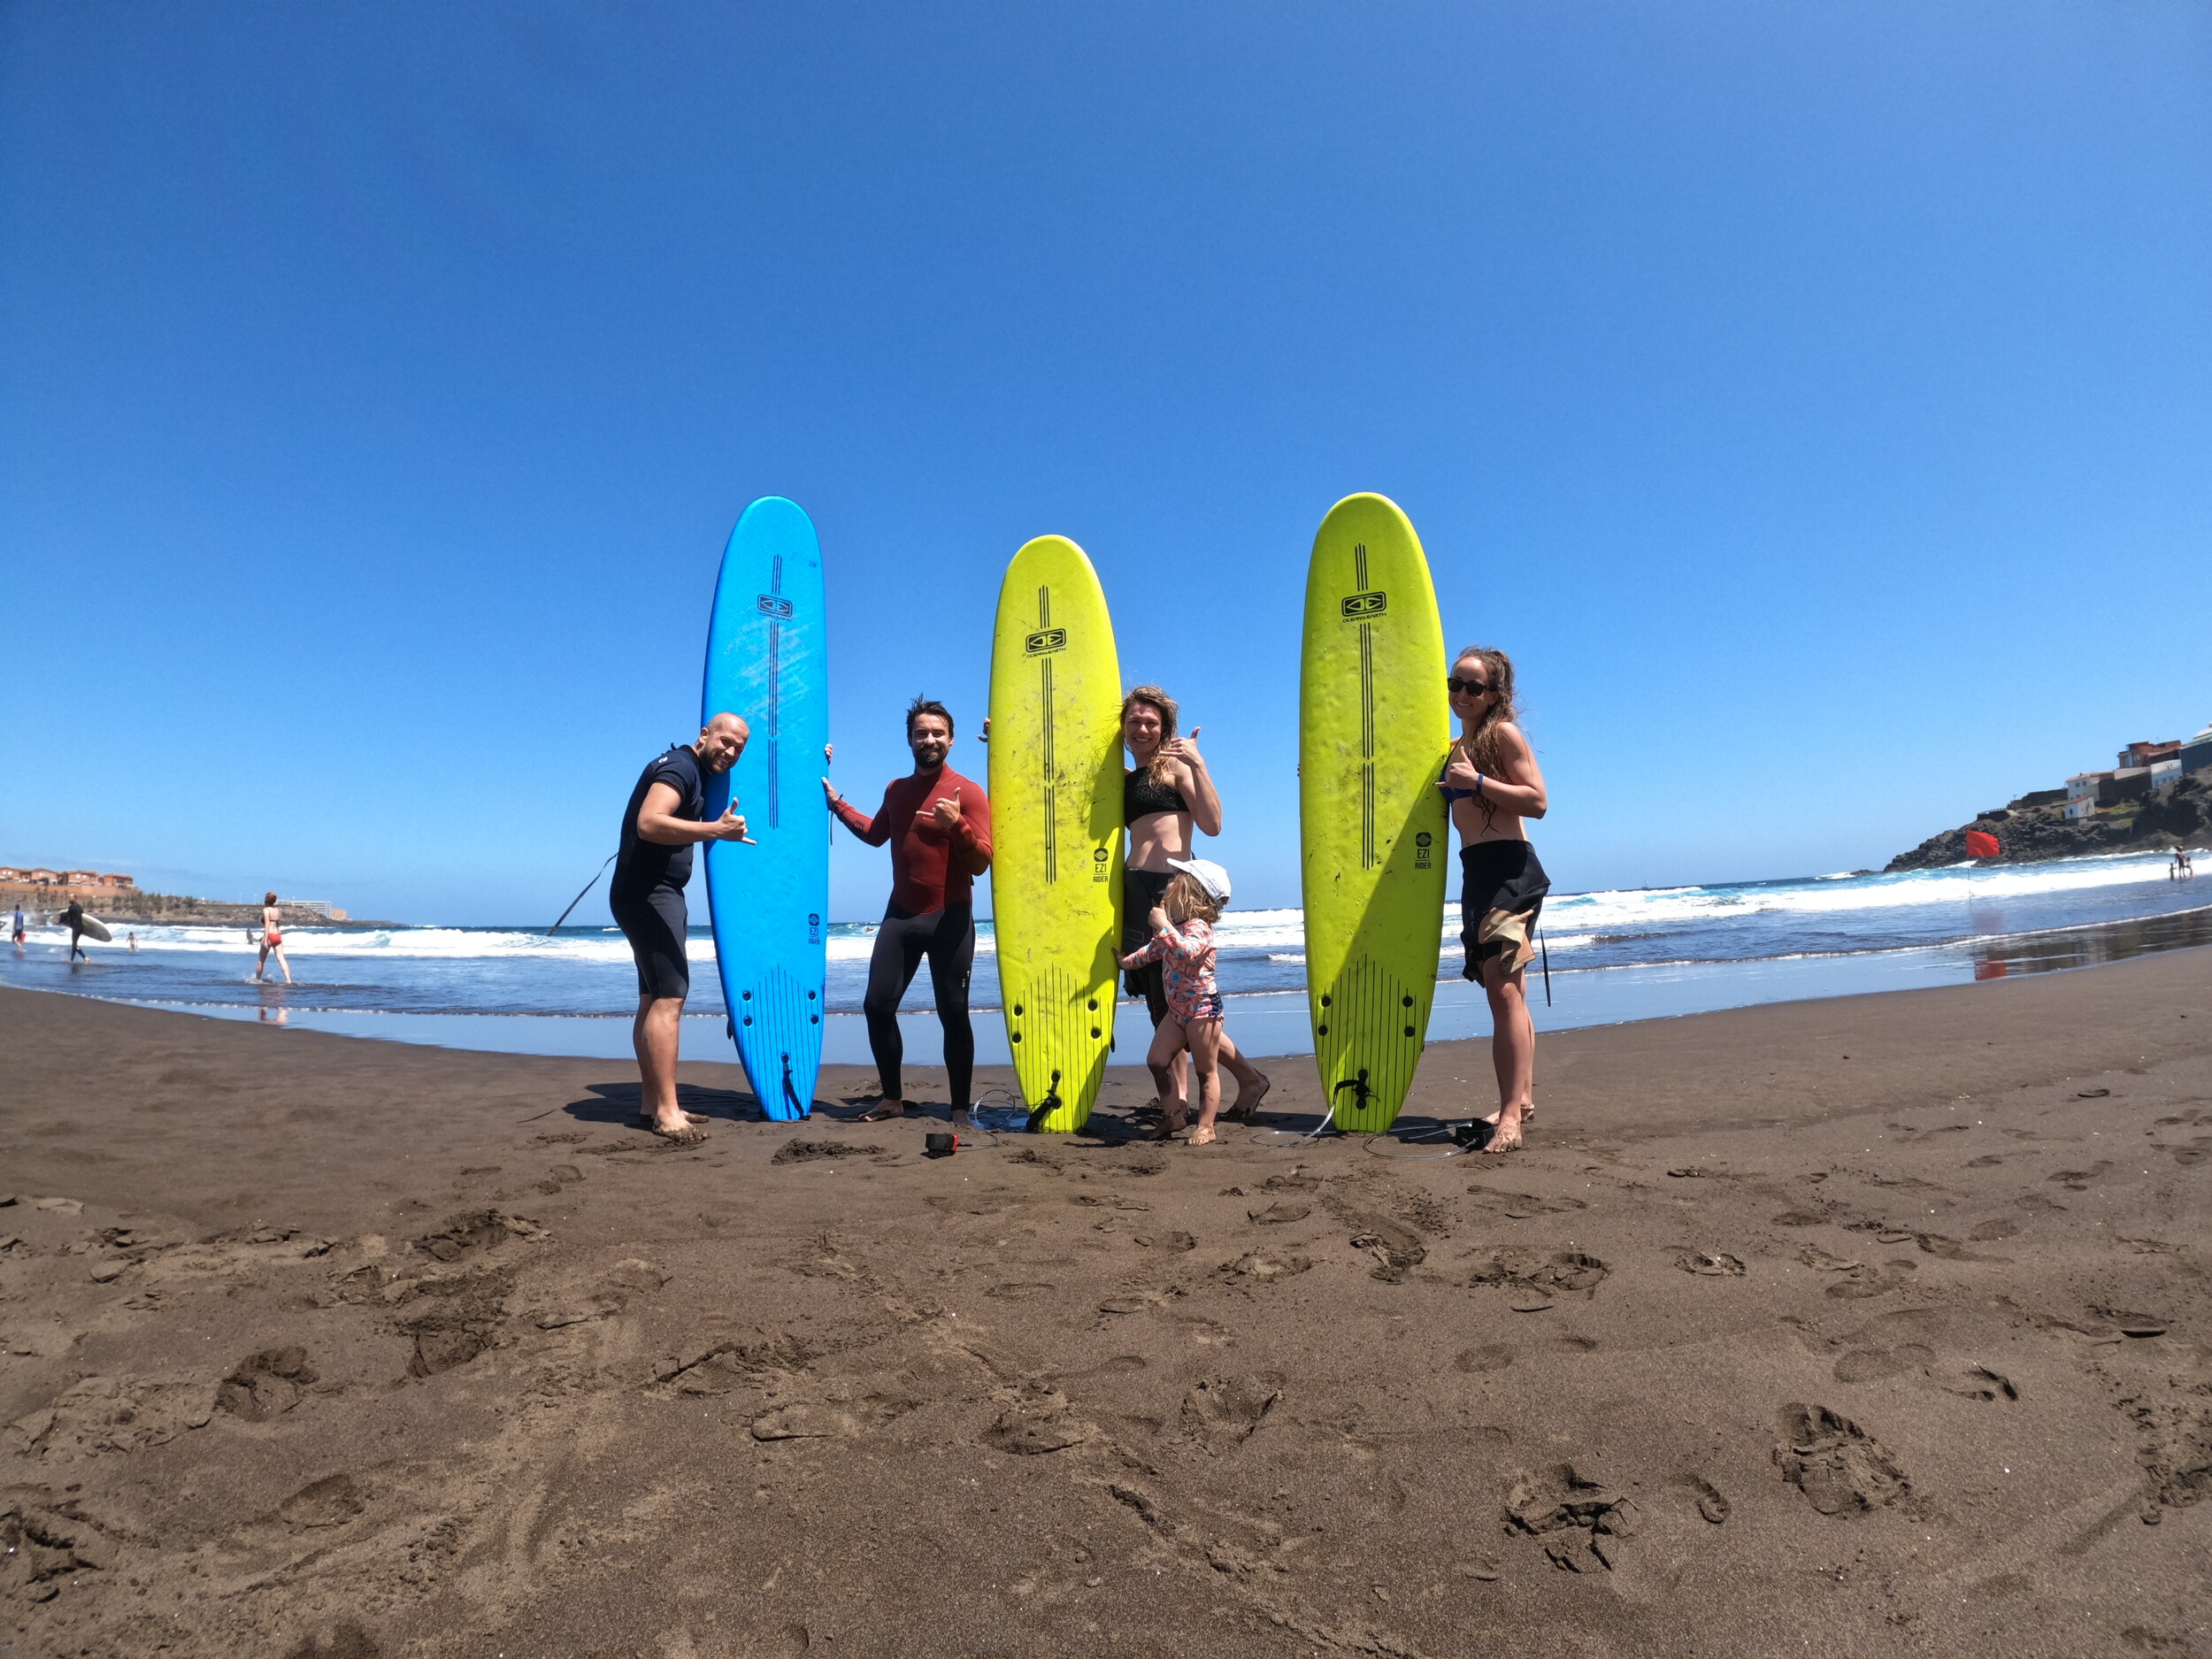 Fanatic Boarders Center Surfing Courses surfing  Maspalomas Kids surfinging courses group surfing courses surfing lessons on all the levels Private surfing courses surfing courses near.JPG